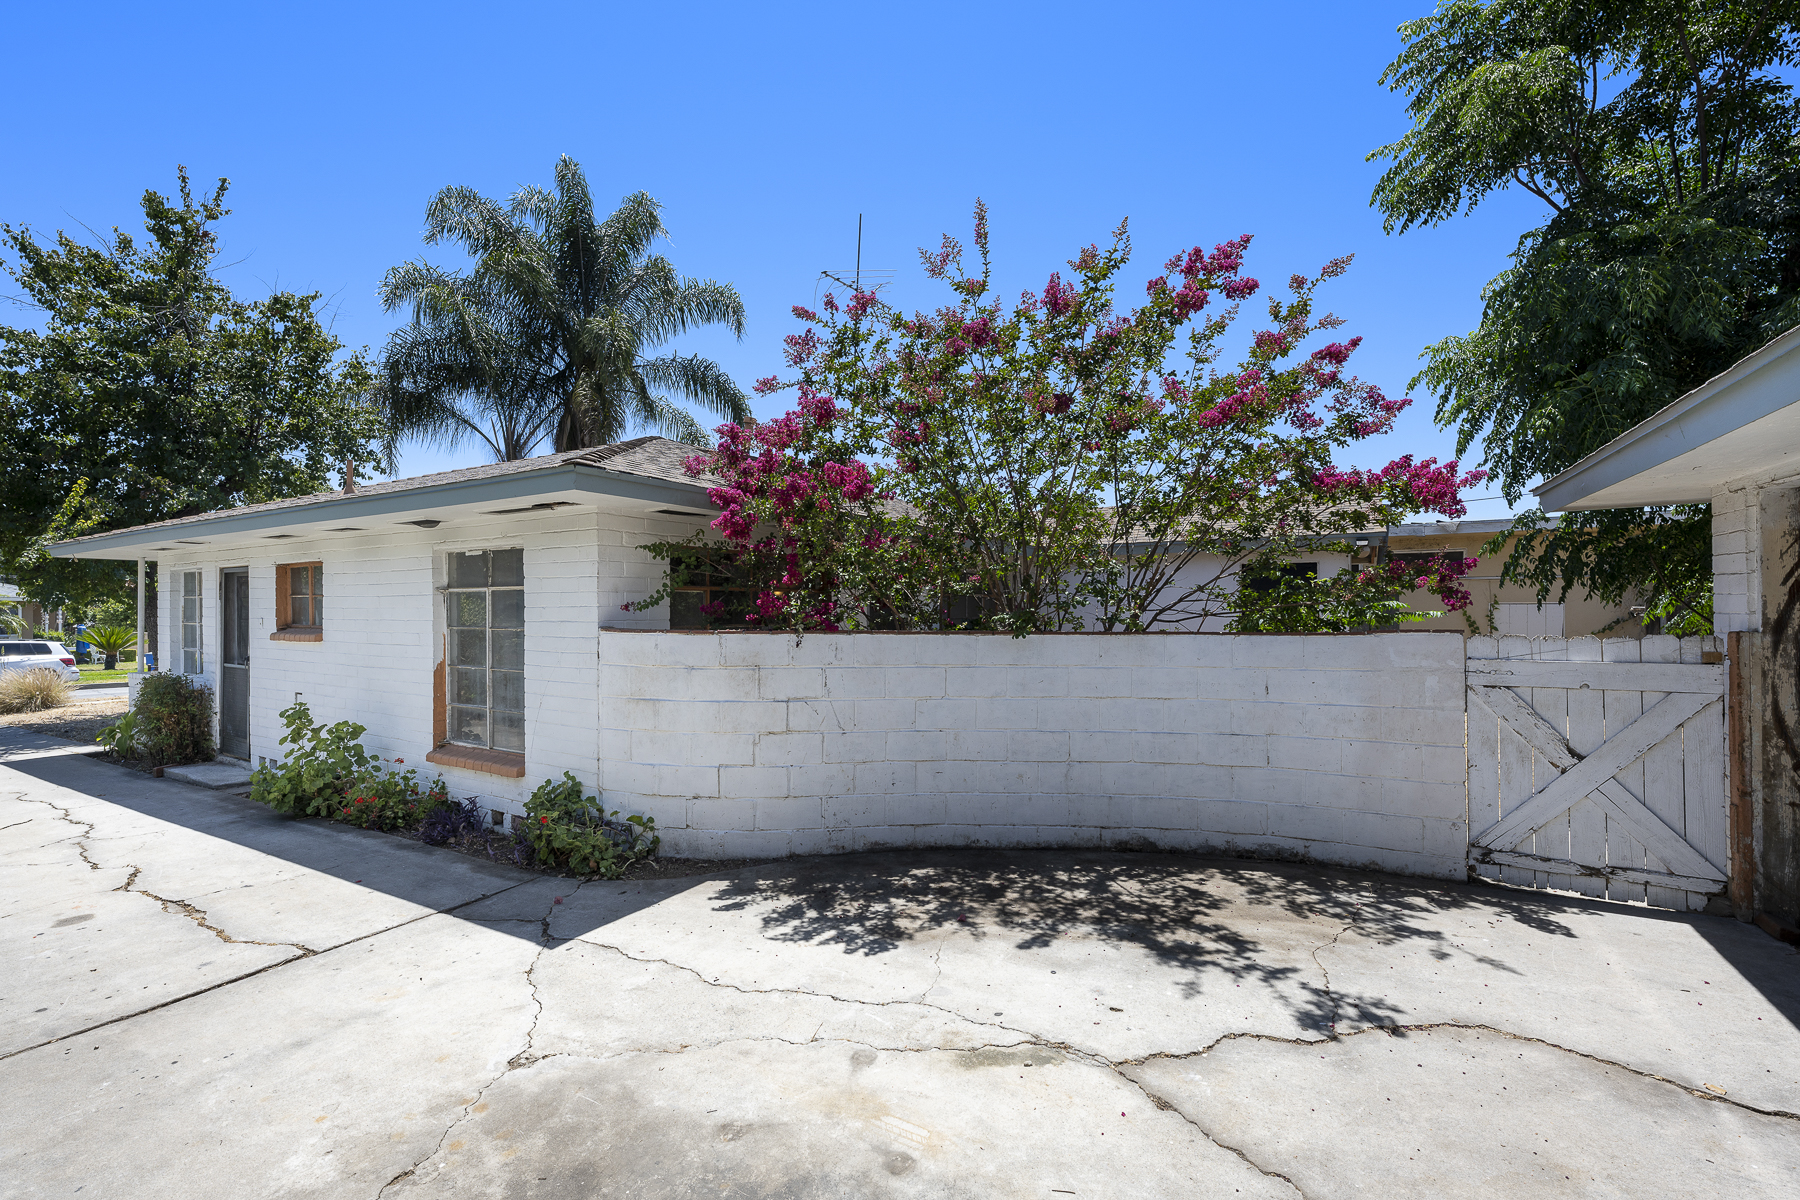 319 E. Francis Ave, La Habra, CA 90631: Exterior shot, front of house and gate.